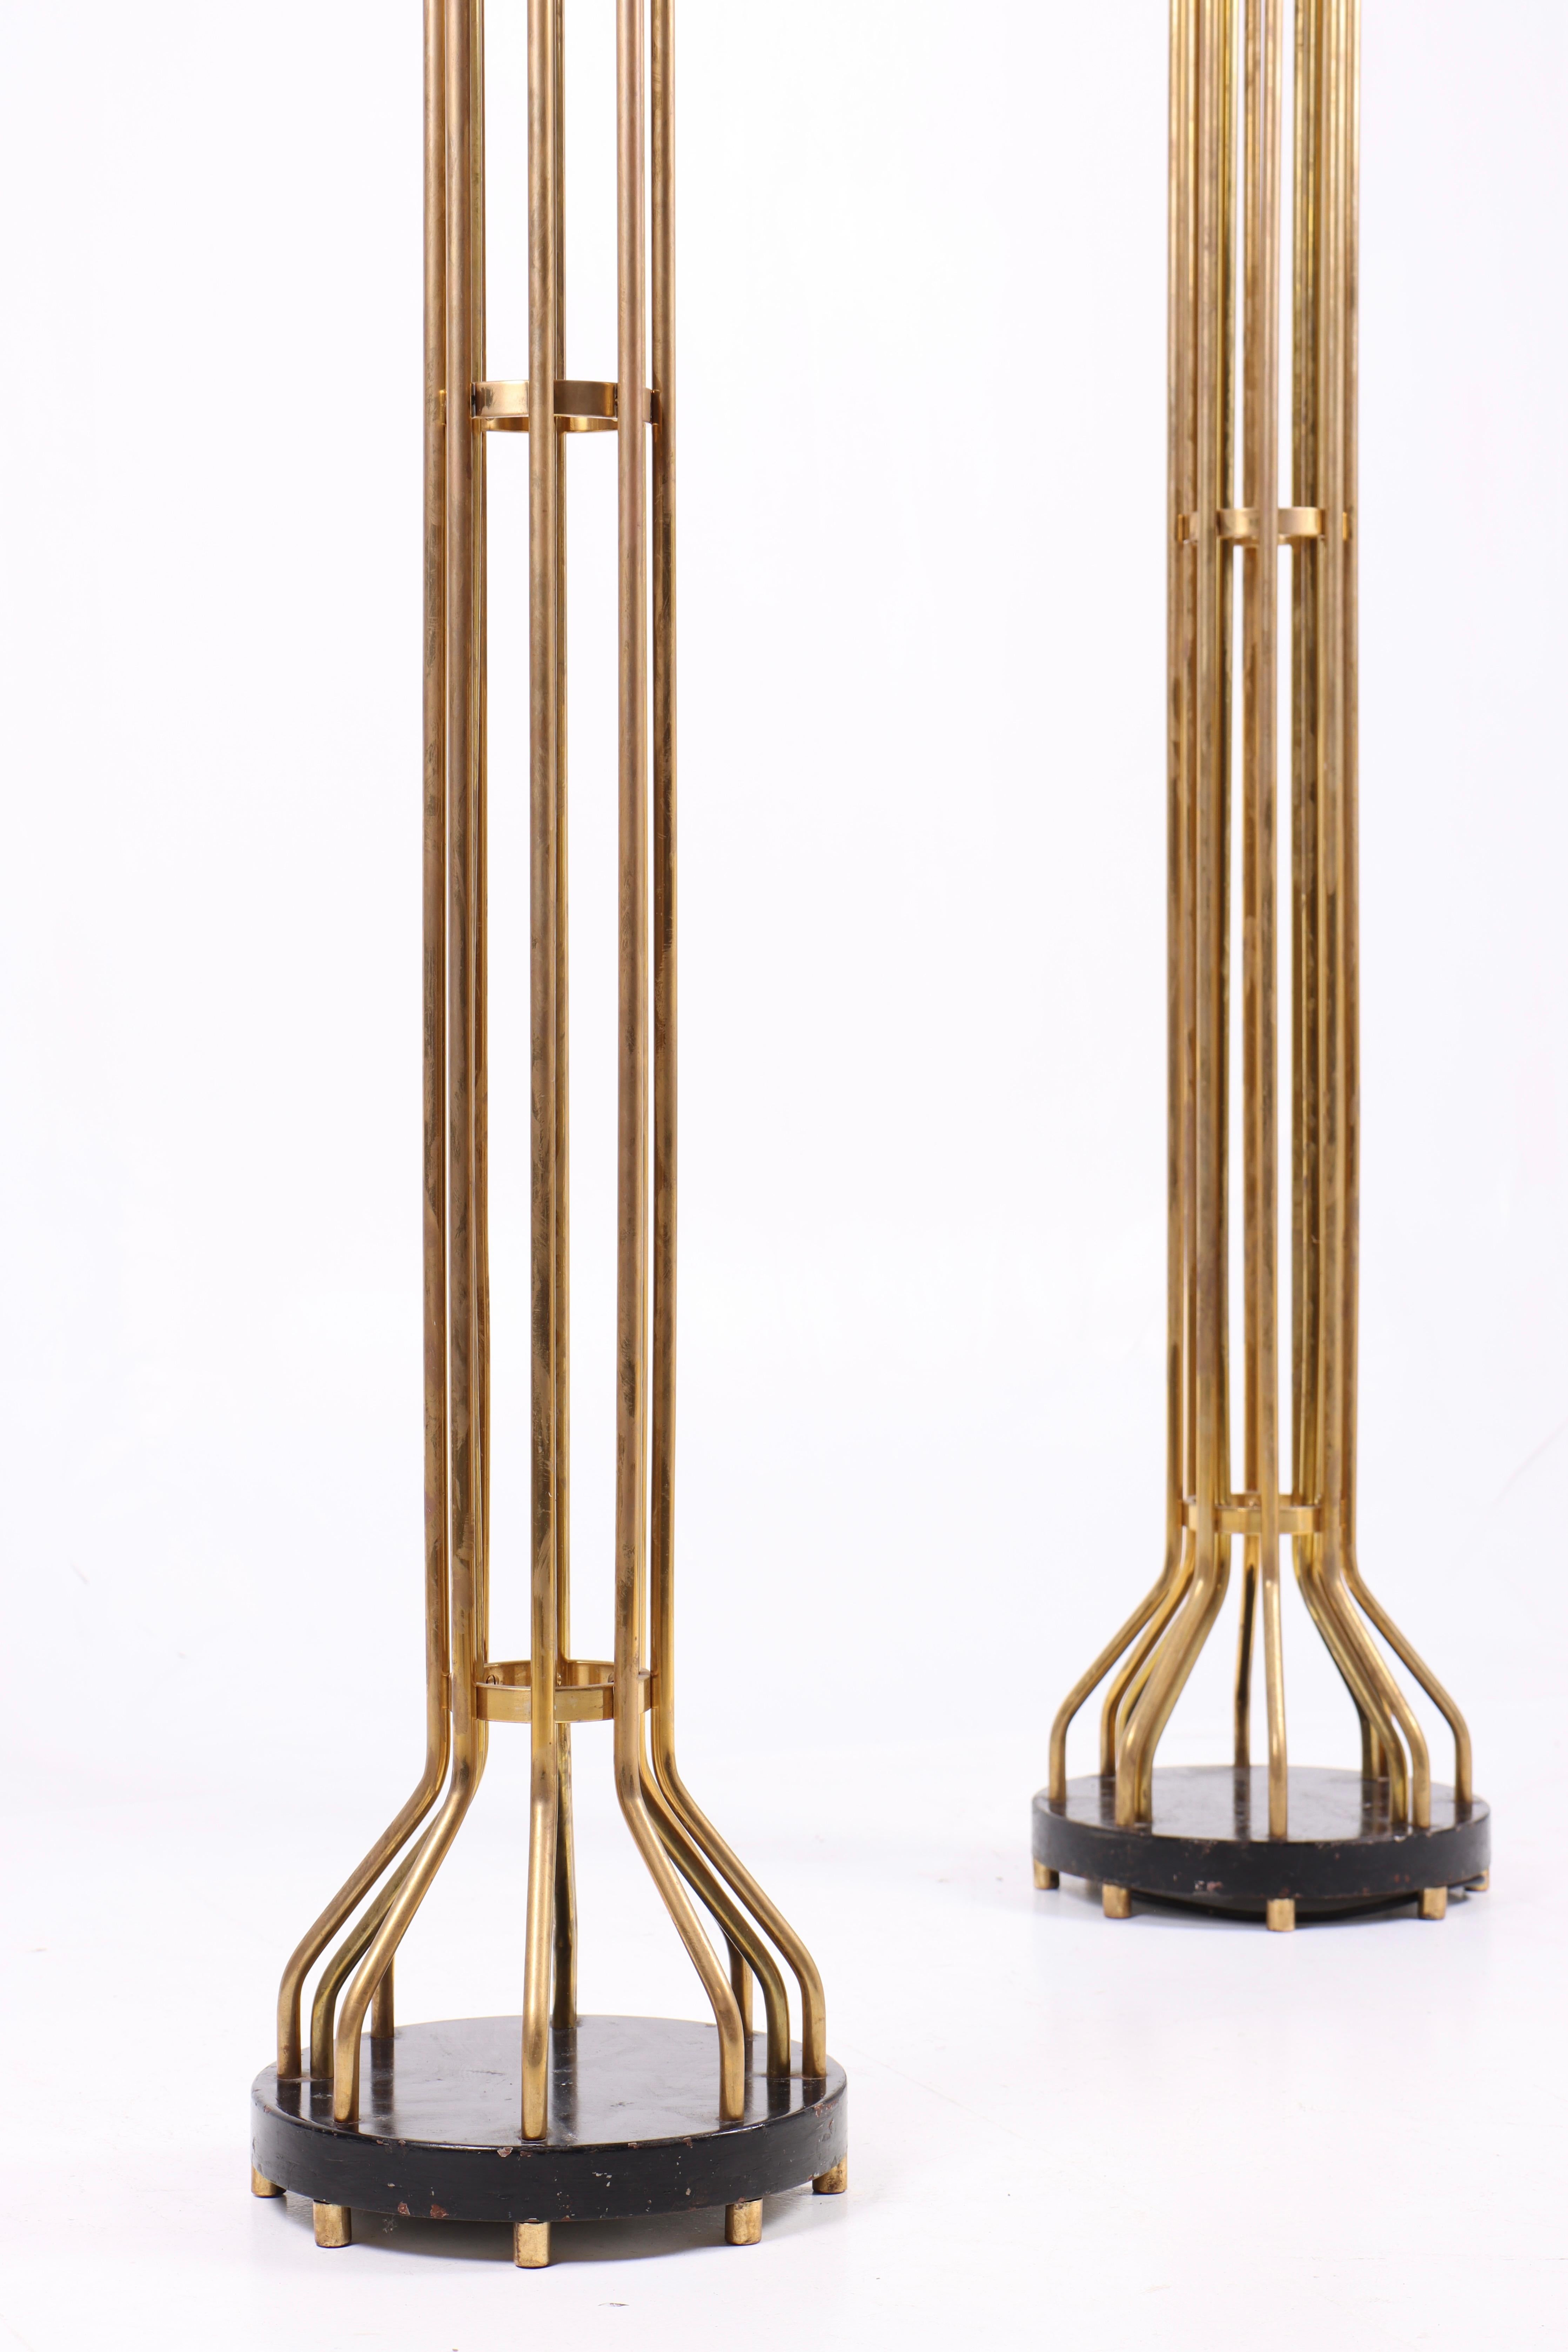 Mid-20th Century Pair of Midcentury Floor Lamps in Patinated Brass, Made in Denmark, 1950s For Sale